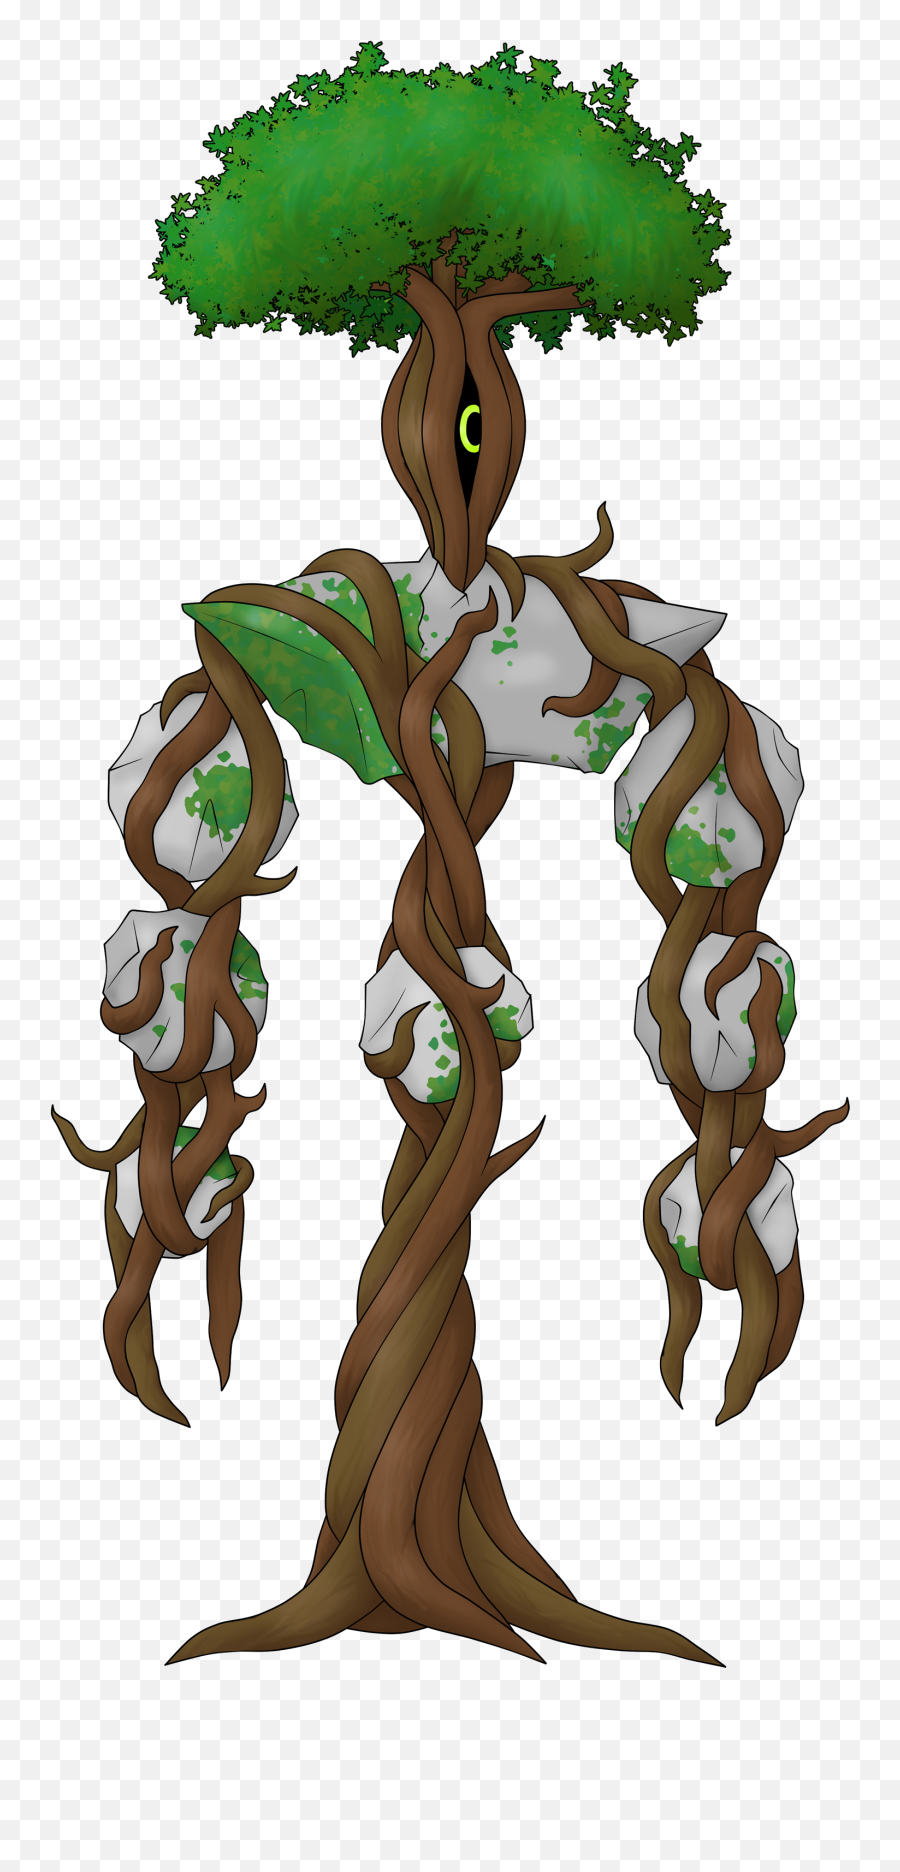 They Grow - Armoured Treant Emoji,Show And Tell Clipart